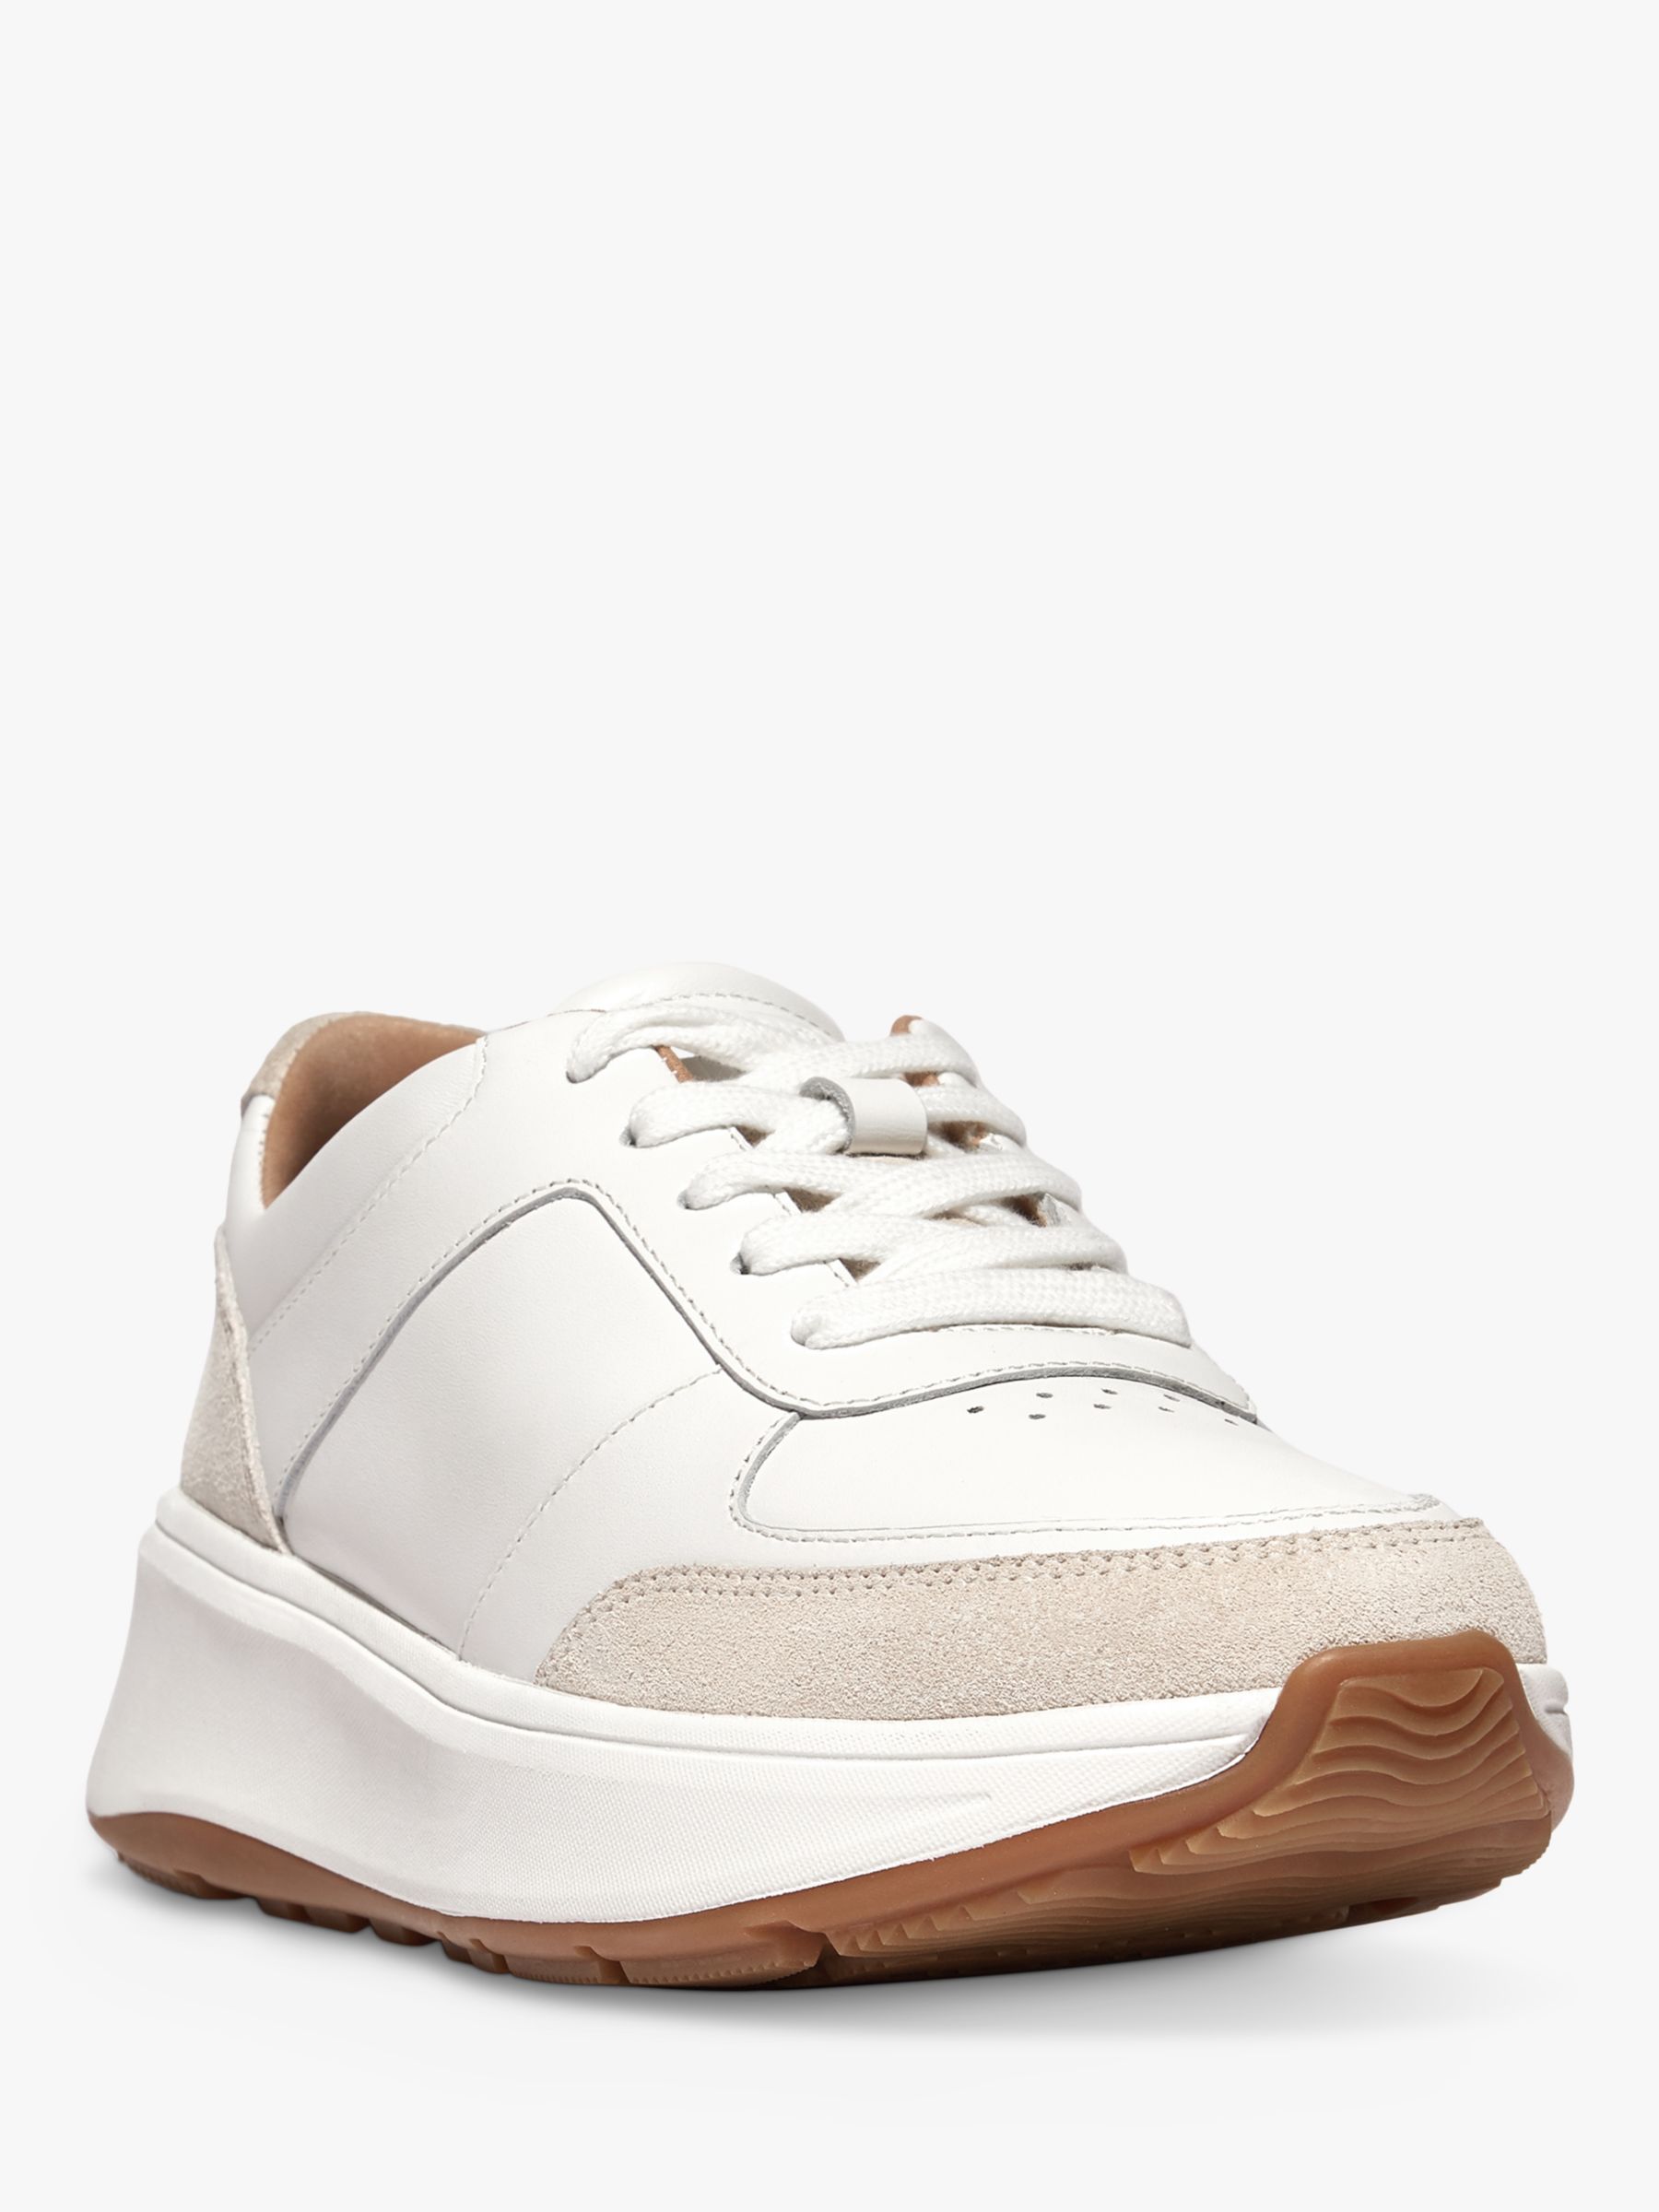 FitFlop Fmode Leather Chunky Trainers, Urban White at John Lewis & Partners